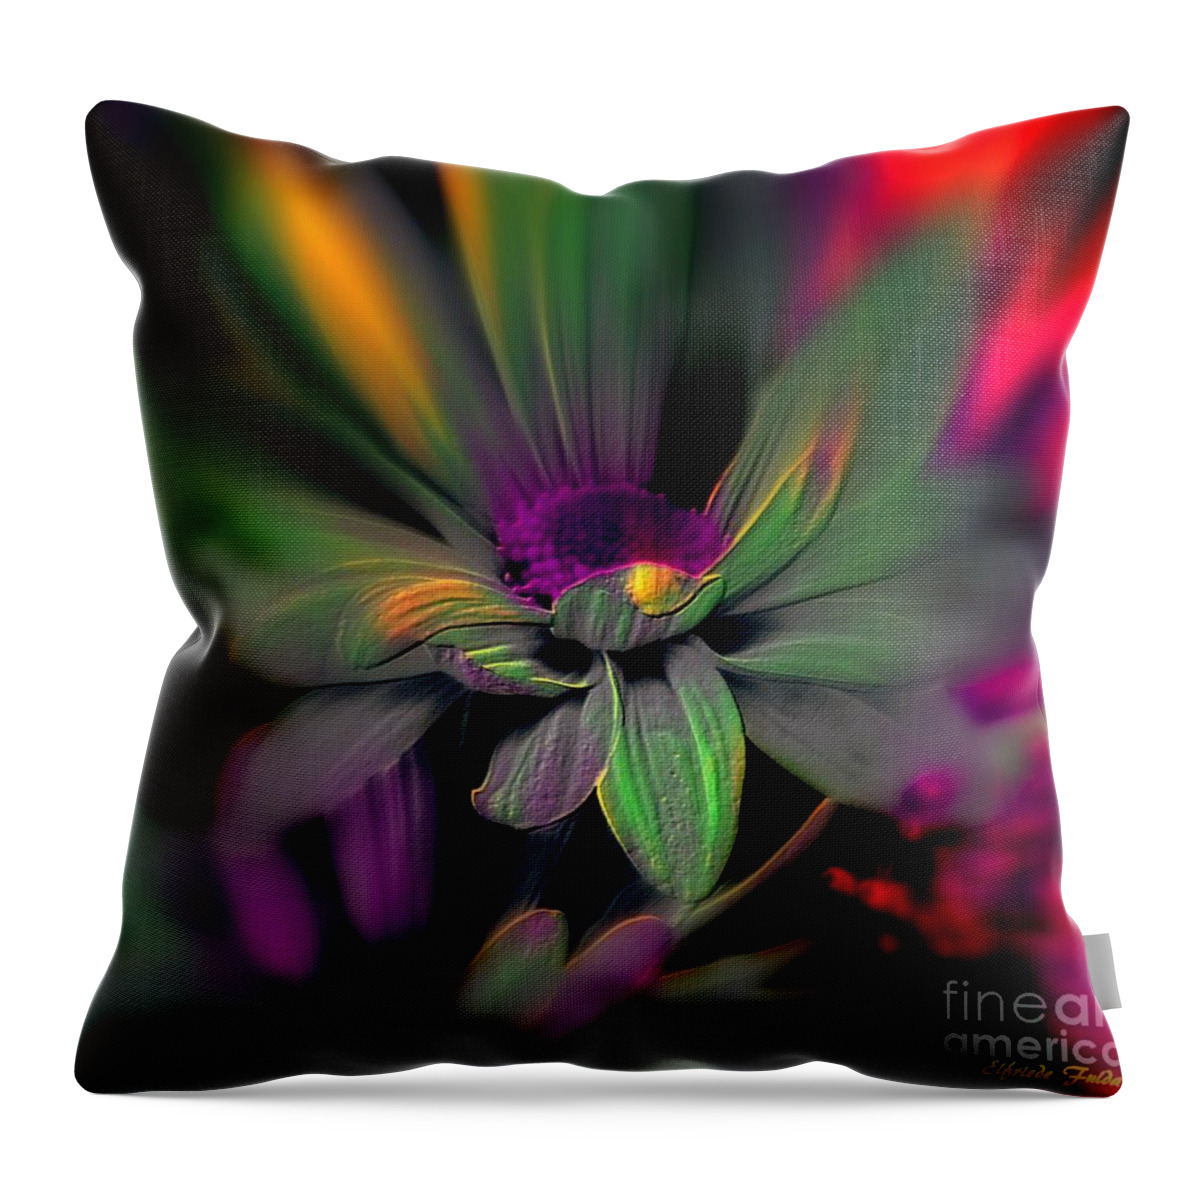 Colorful Throw Pillow featuring the photograph Psychedelic by Elfriede Fulda